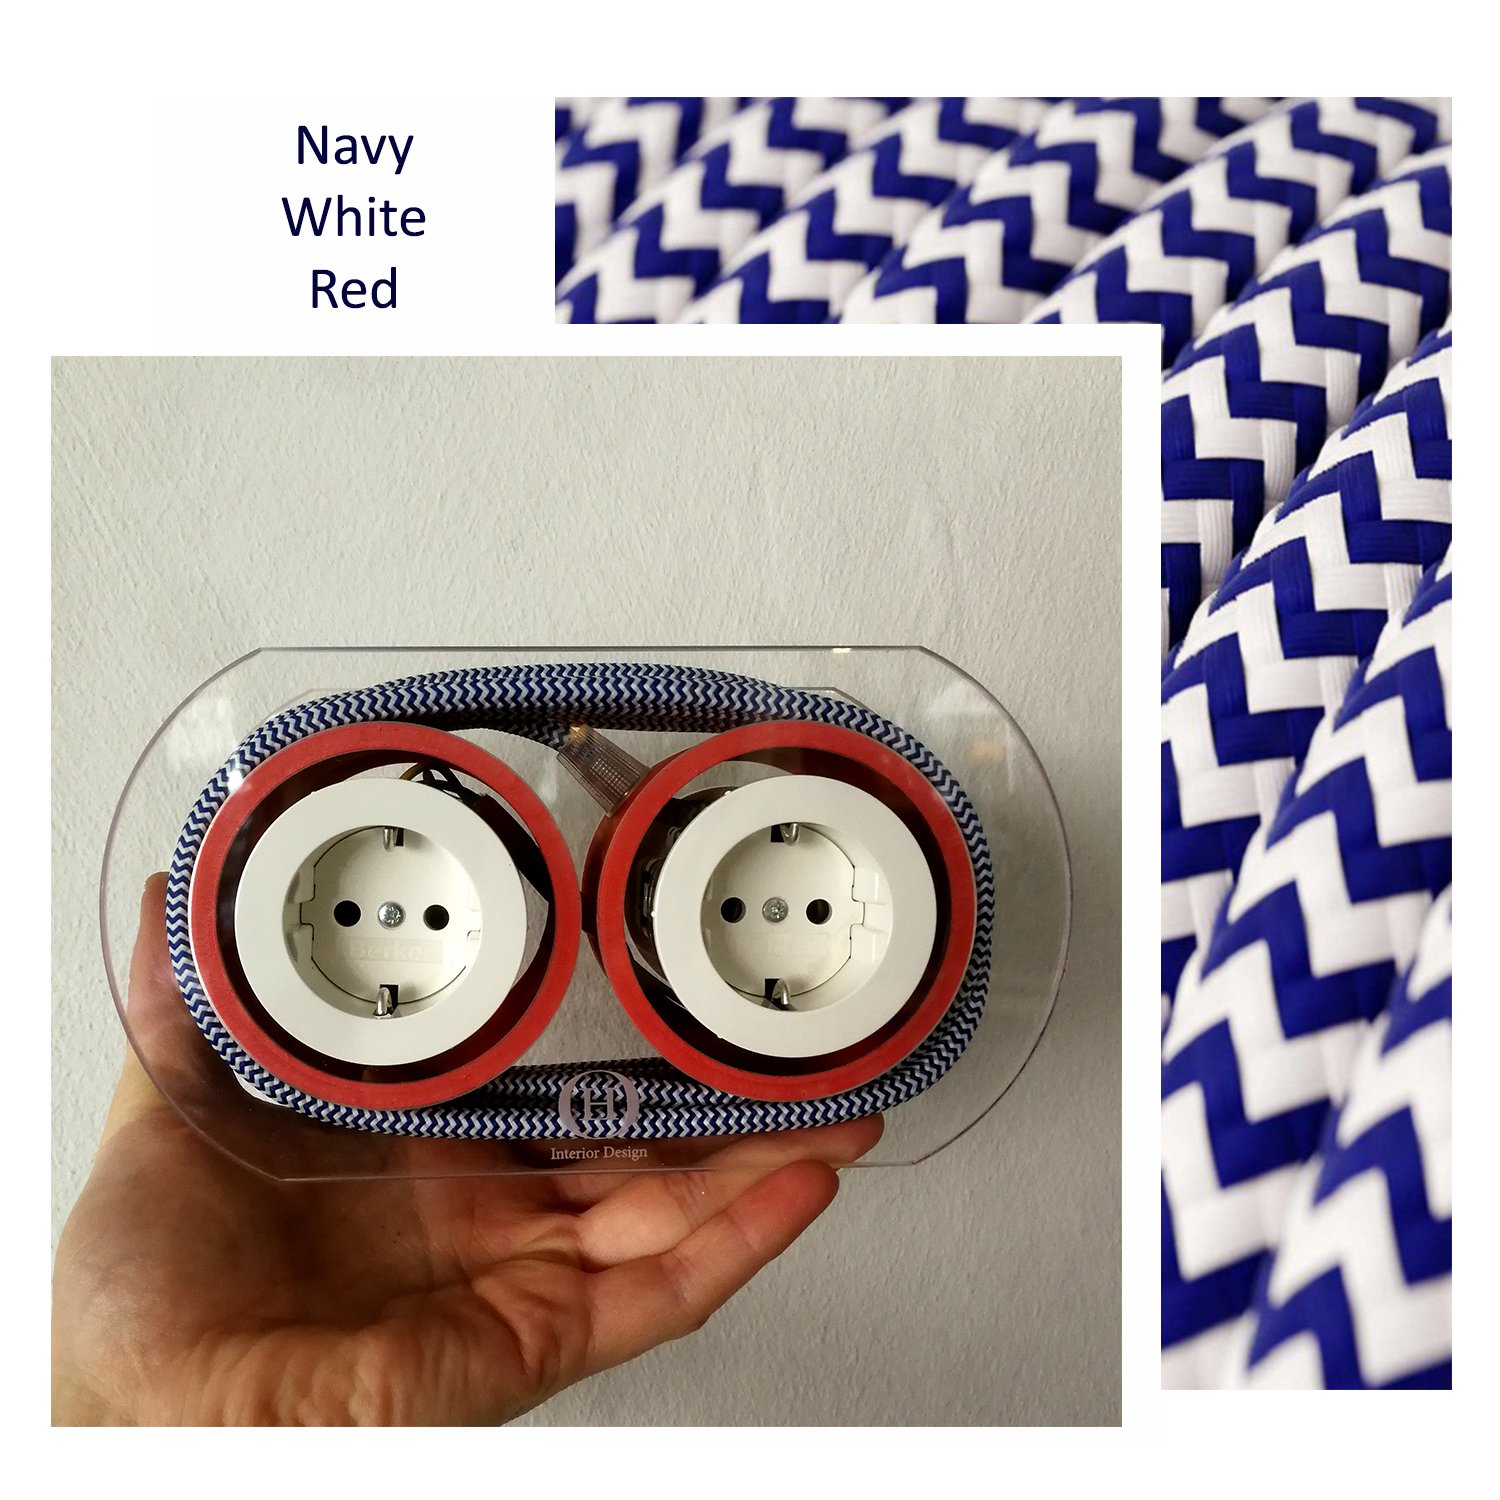 Extension Cord for 4 Plugs_Navy White & Red tubes.jpg